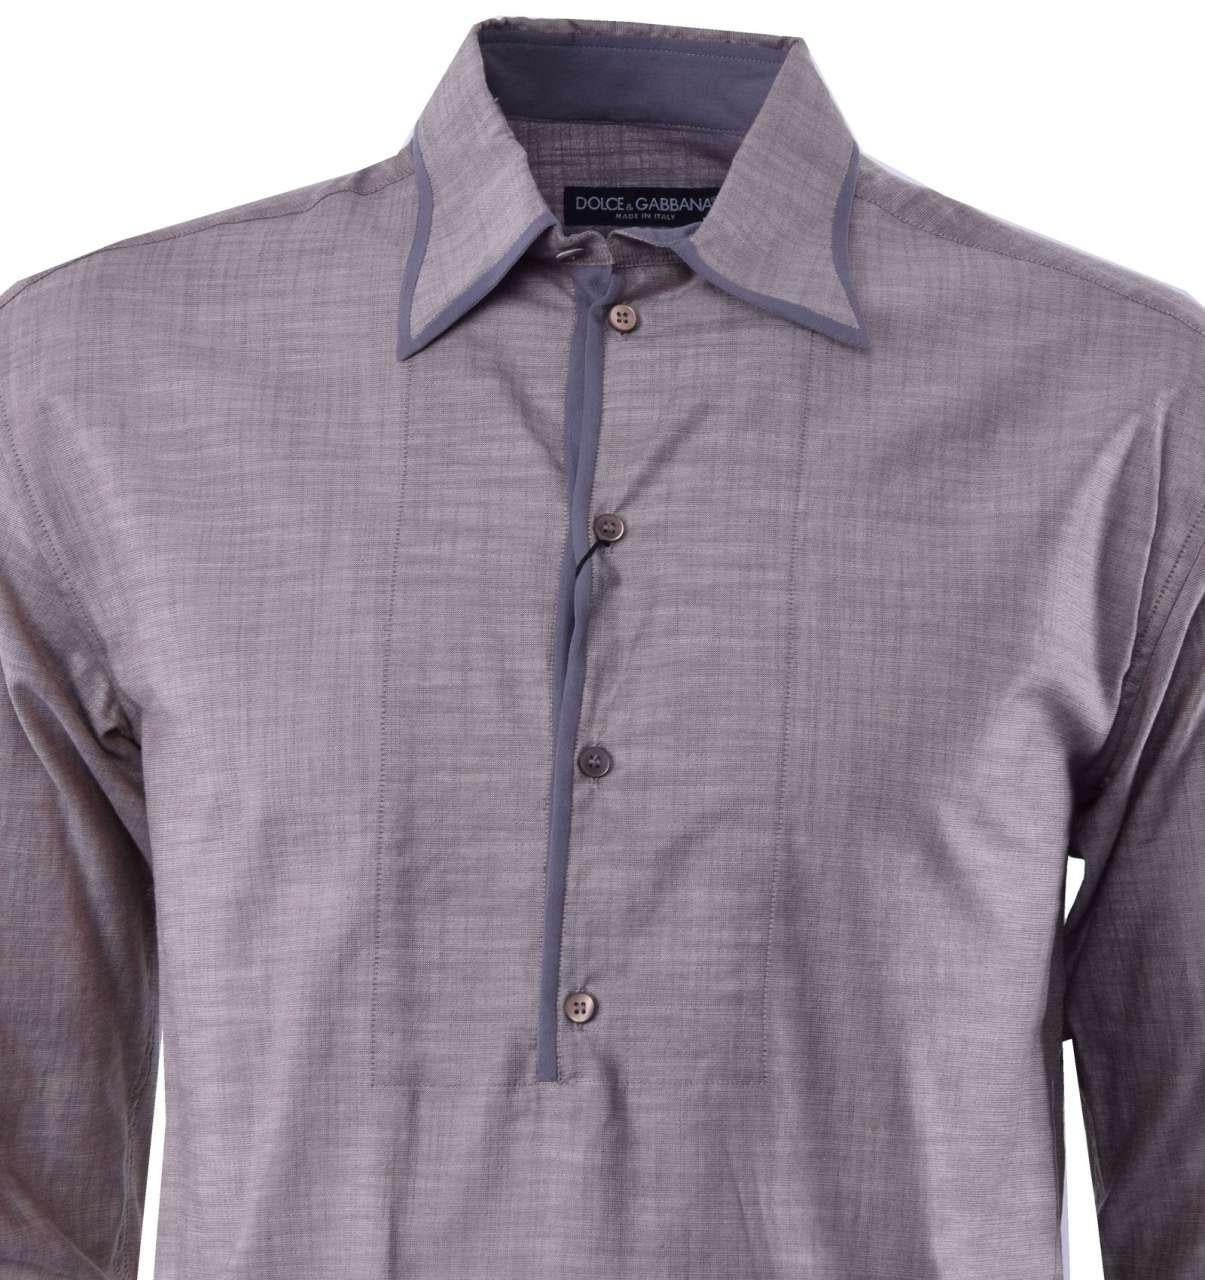 - Over-fit shirt with edged point collar by DOLCE & GABBANA Black Label - New with tag - Former RRP: EUR 395 - MADE in ITALY - Model: G5CG6T-FU5K4-S8232 - Material: 90% Cotton, 10% Silk - Color: Grey / Brown - Small soft collar and large buttons -